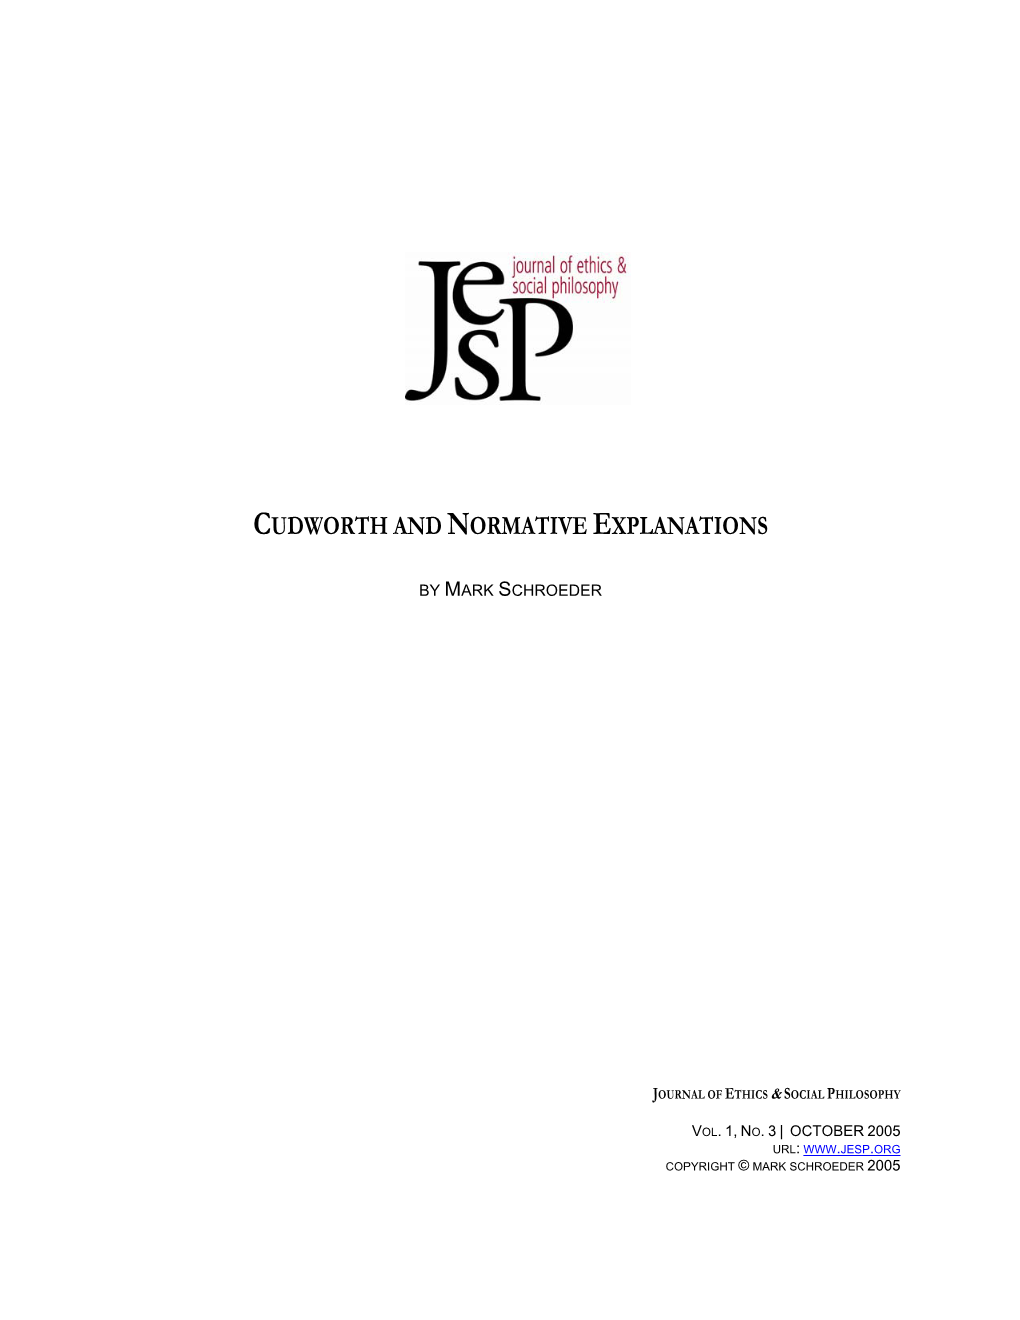 Cudworth and Normative Explanations